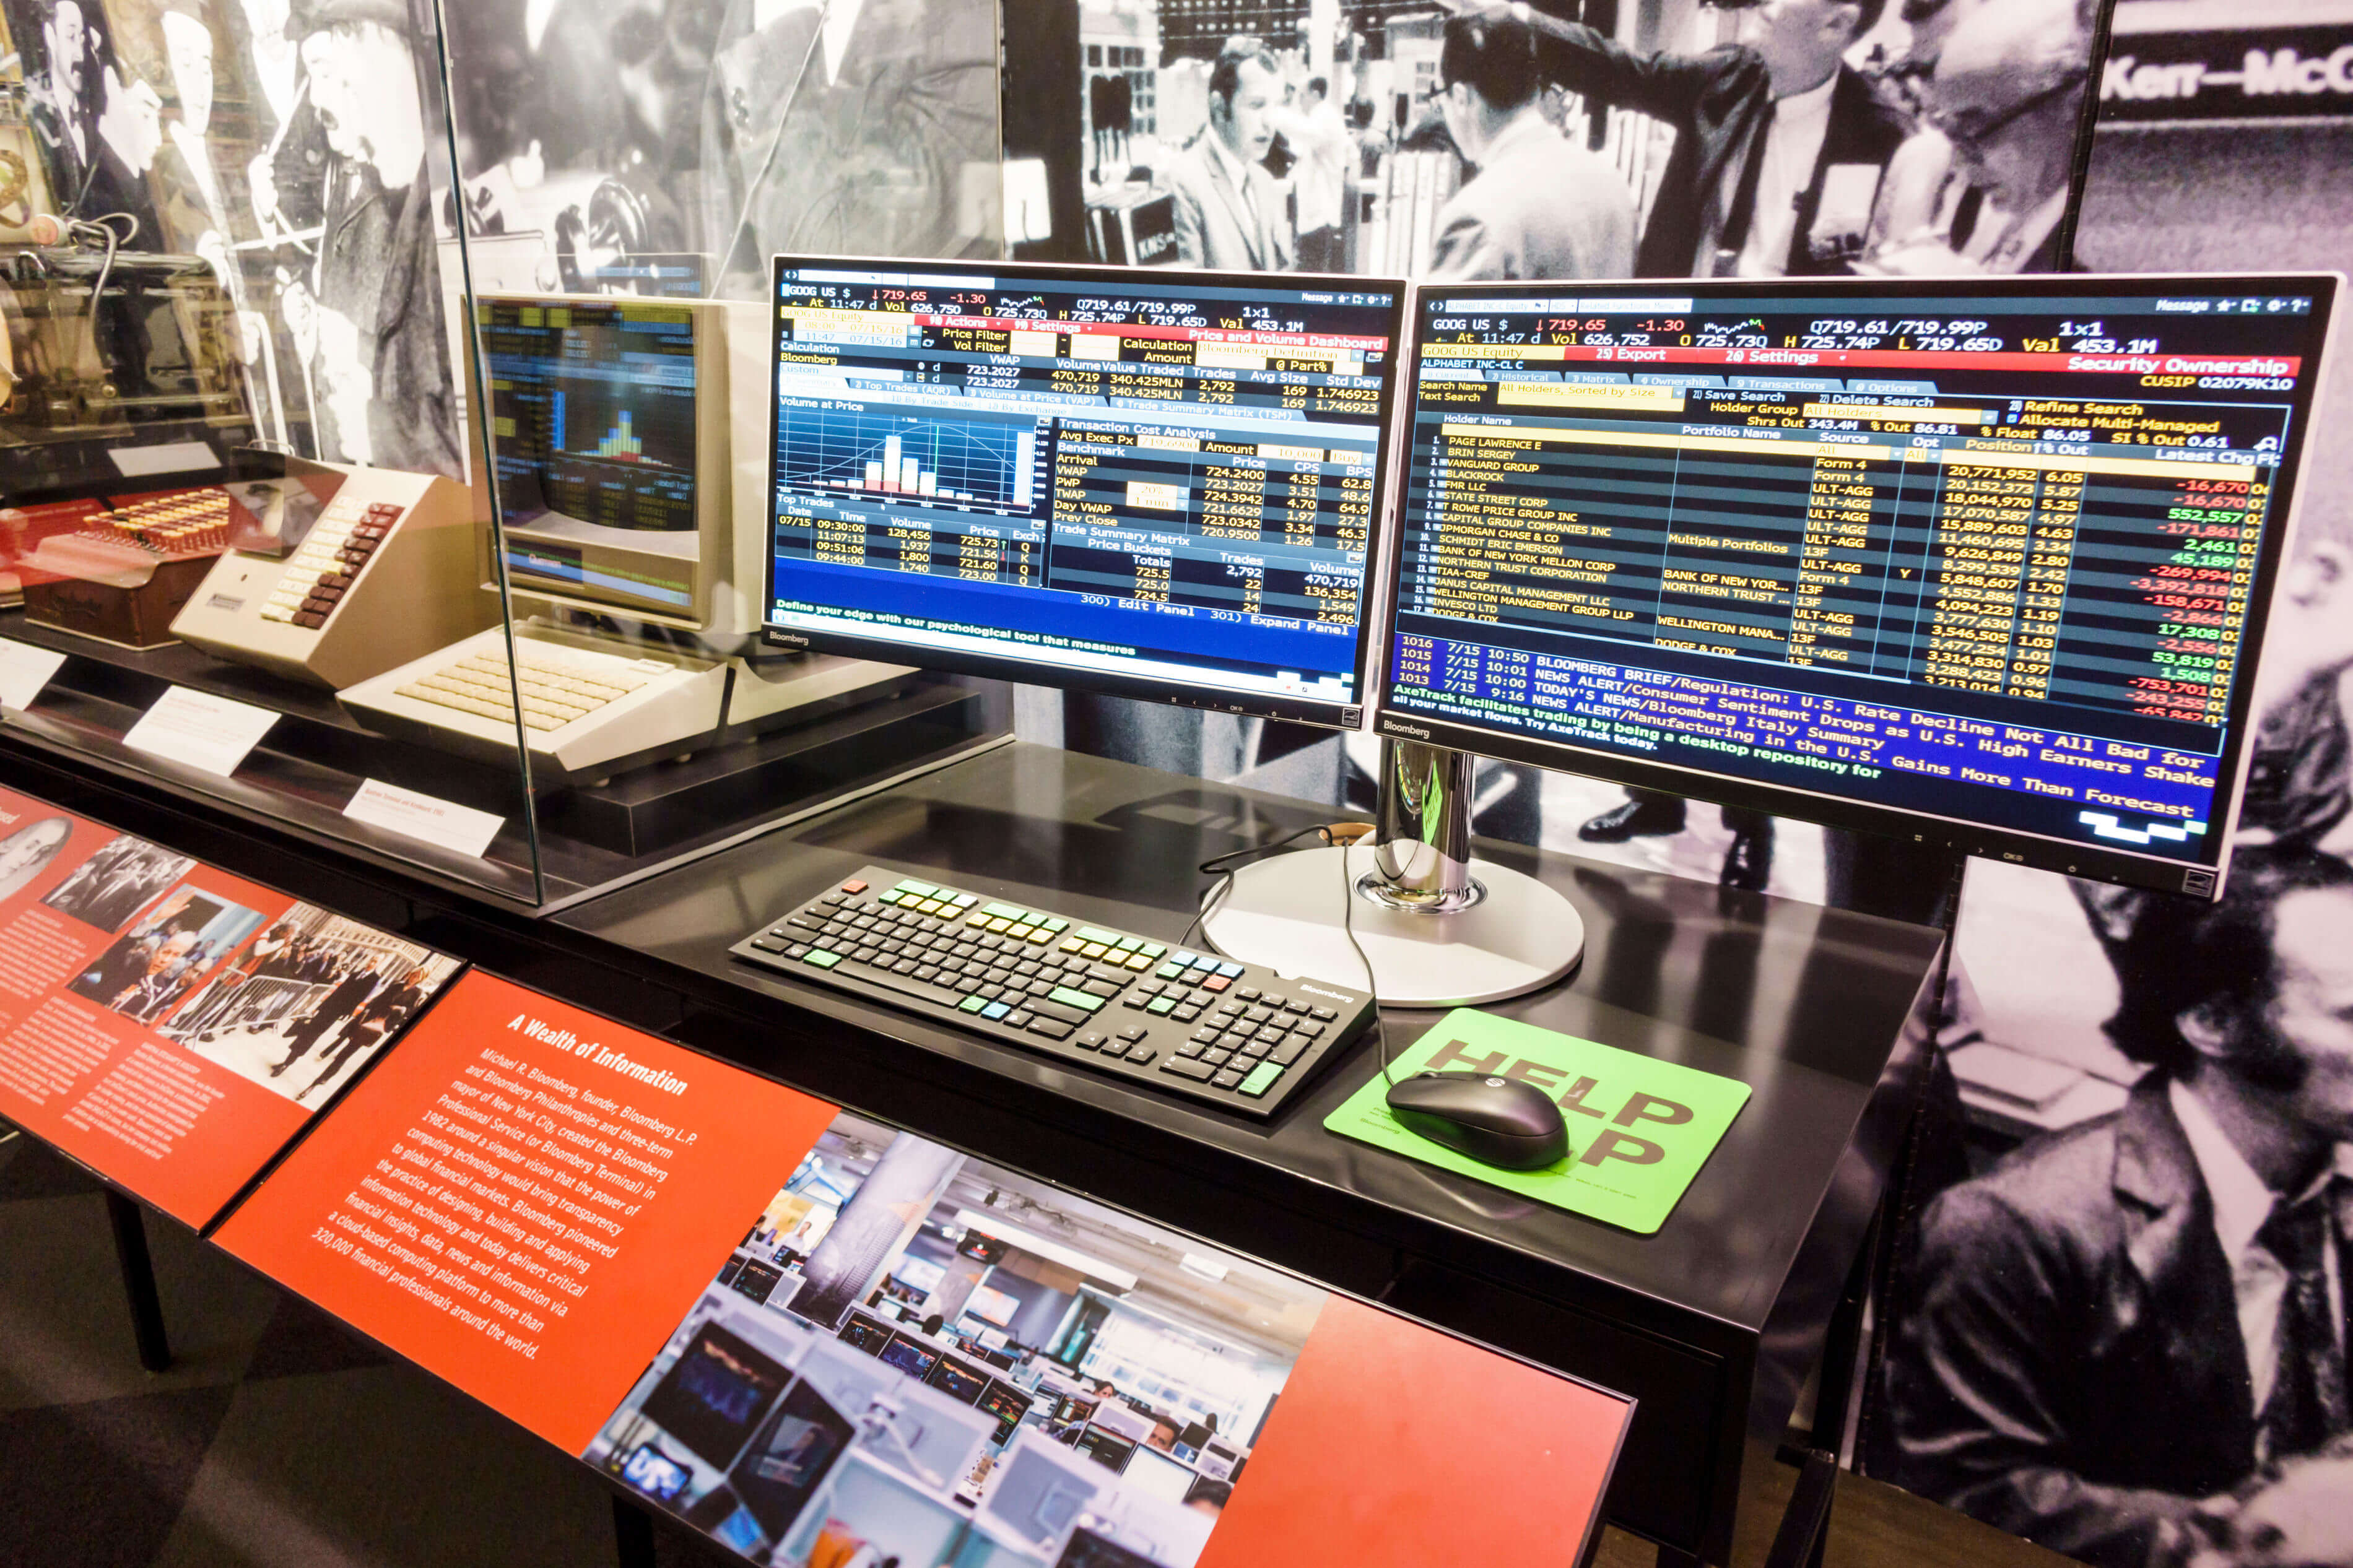 When Will Cybersecurity Get Its Bloomberg Terminal?